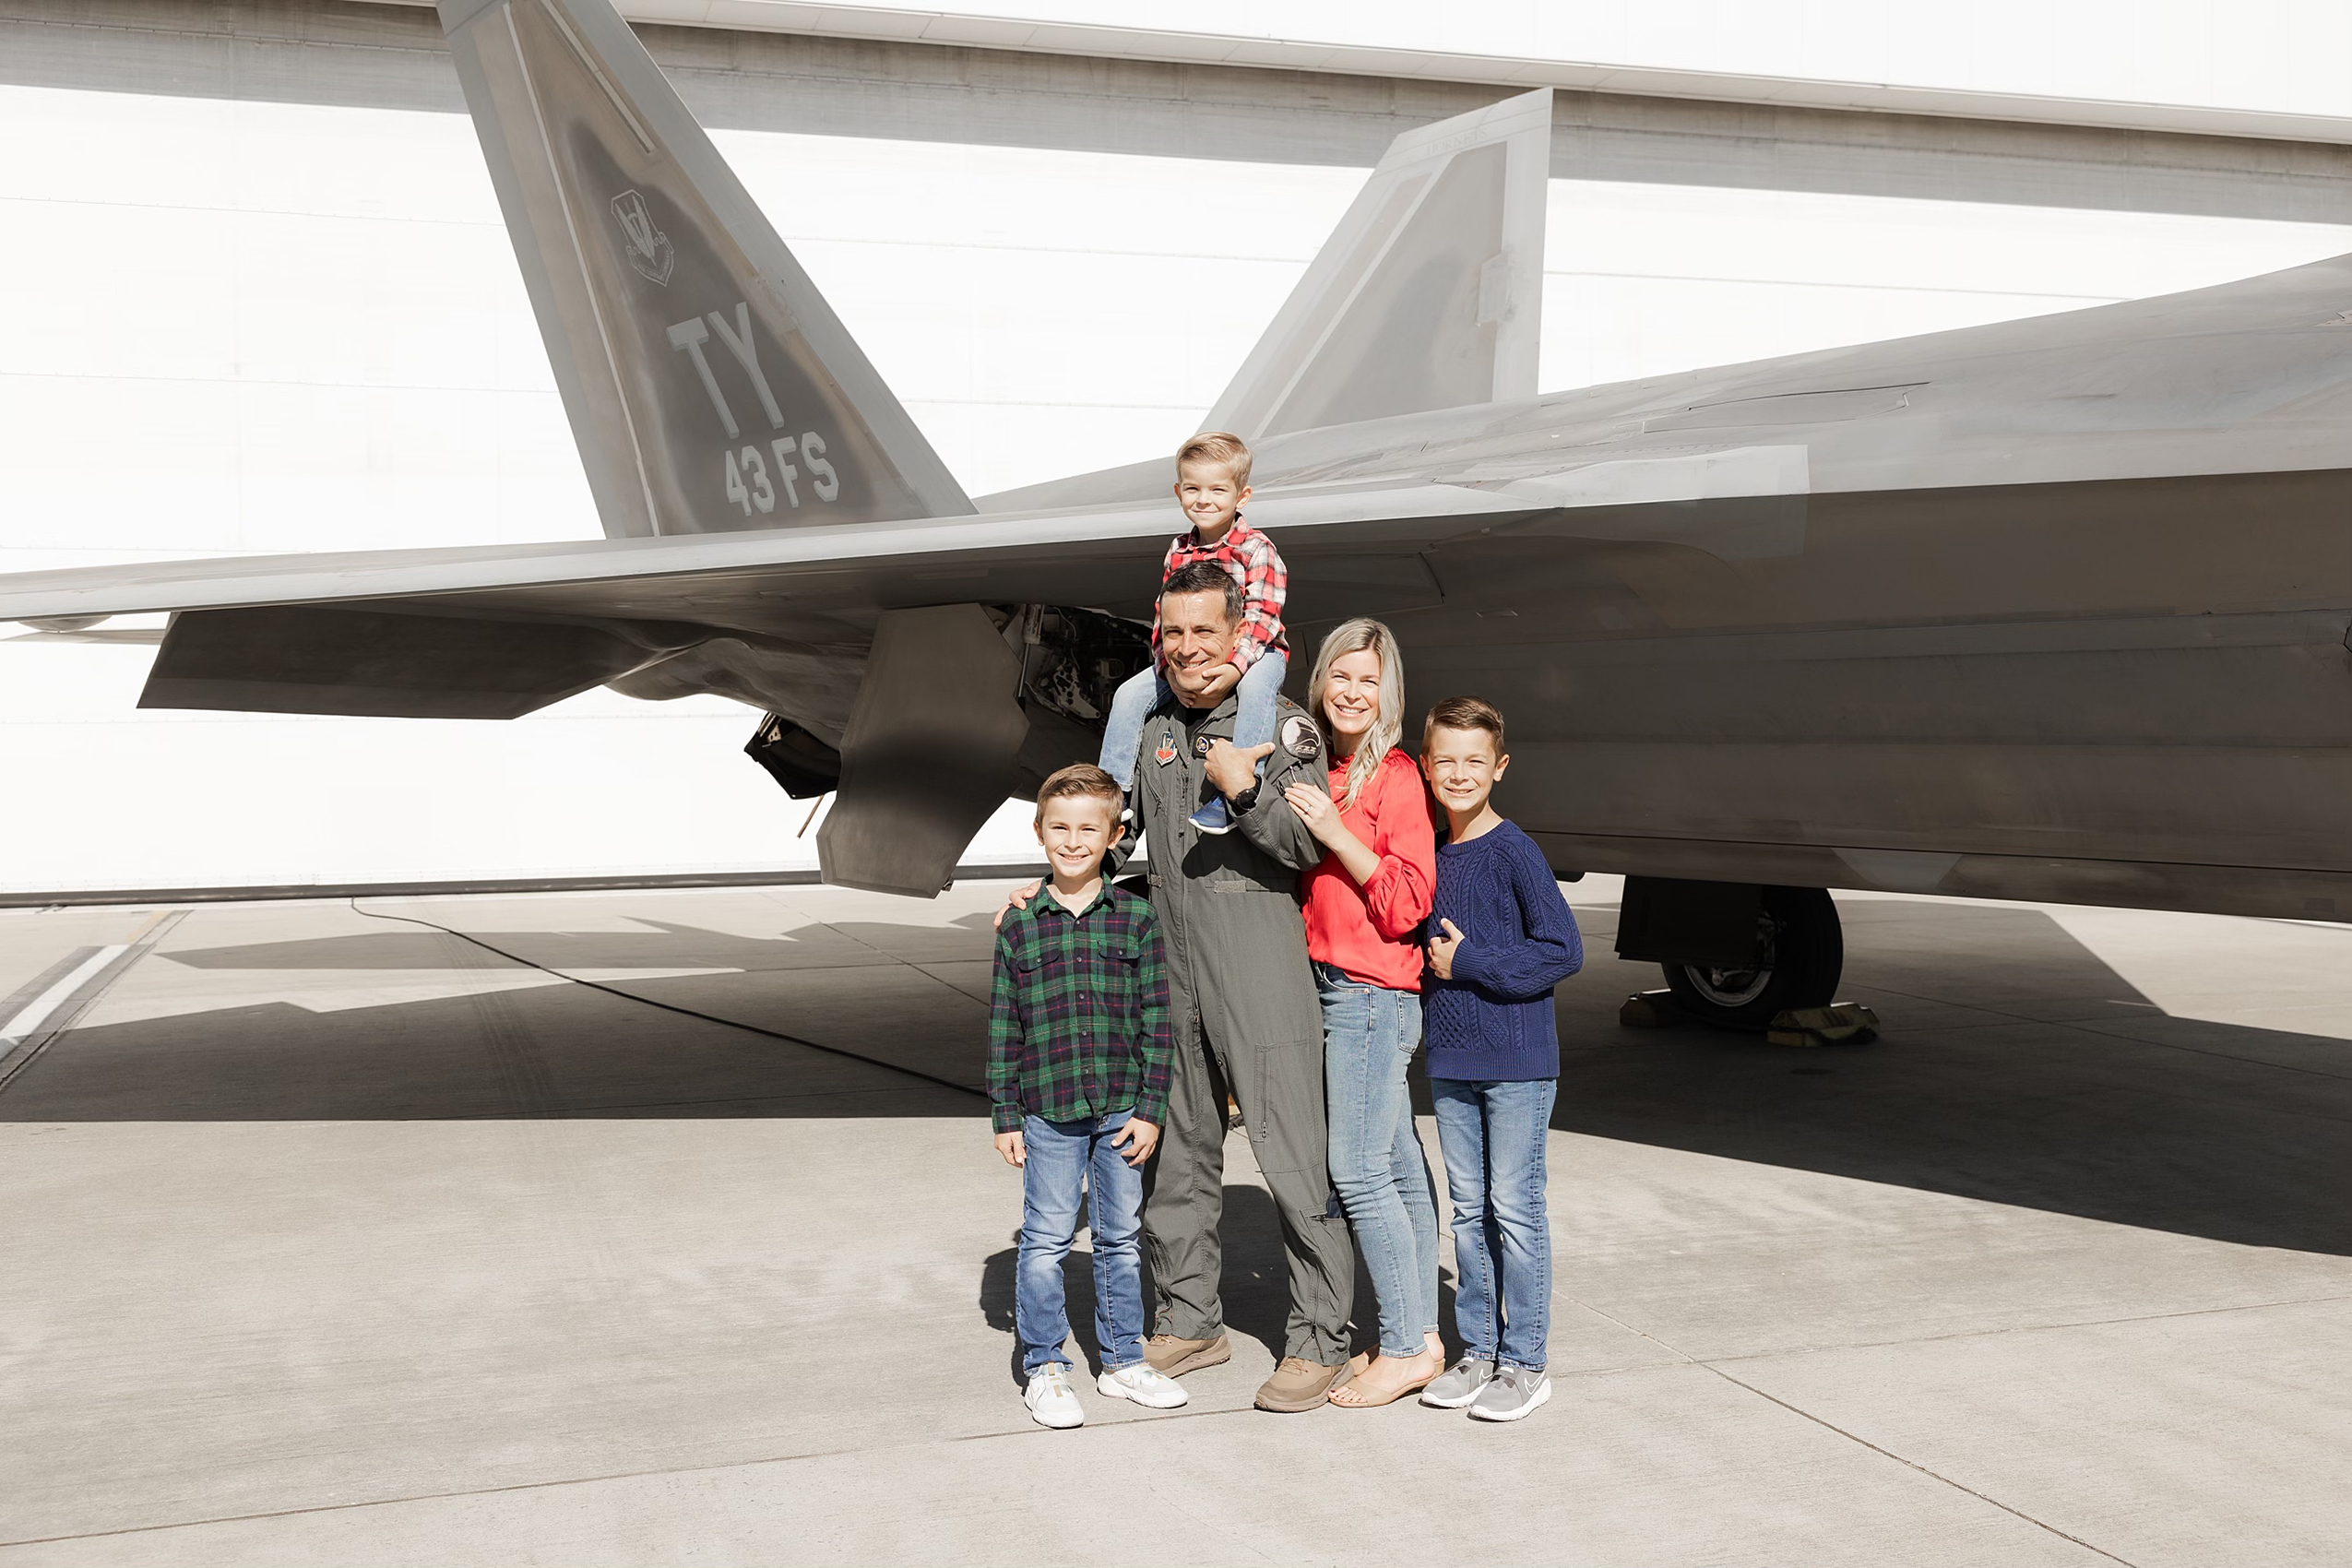 Fighter pilot poses with his family